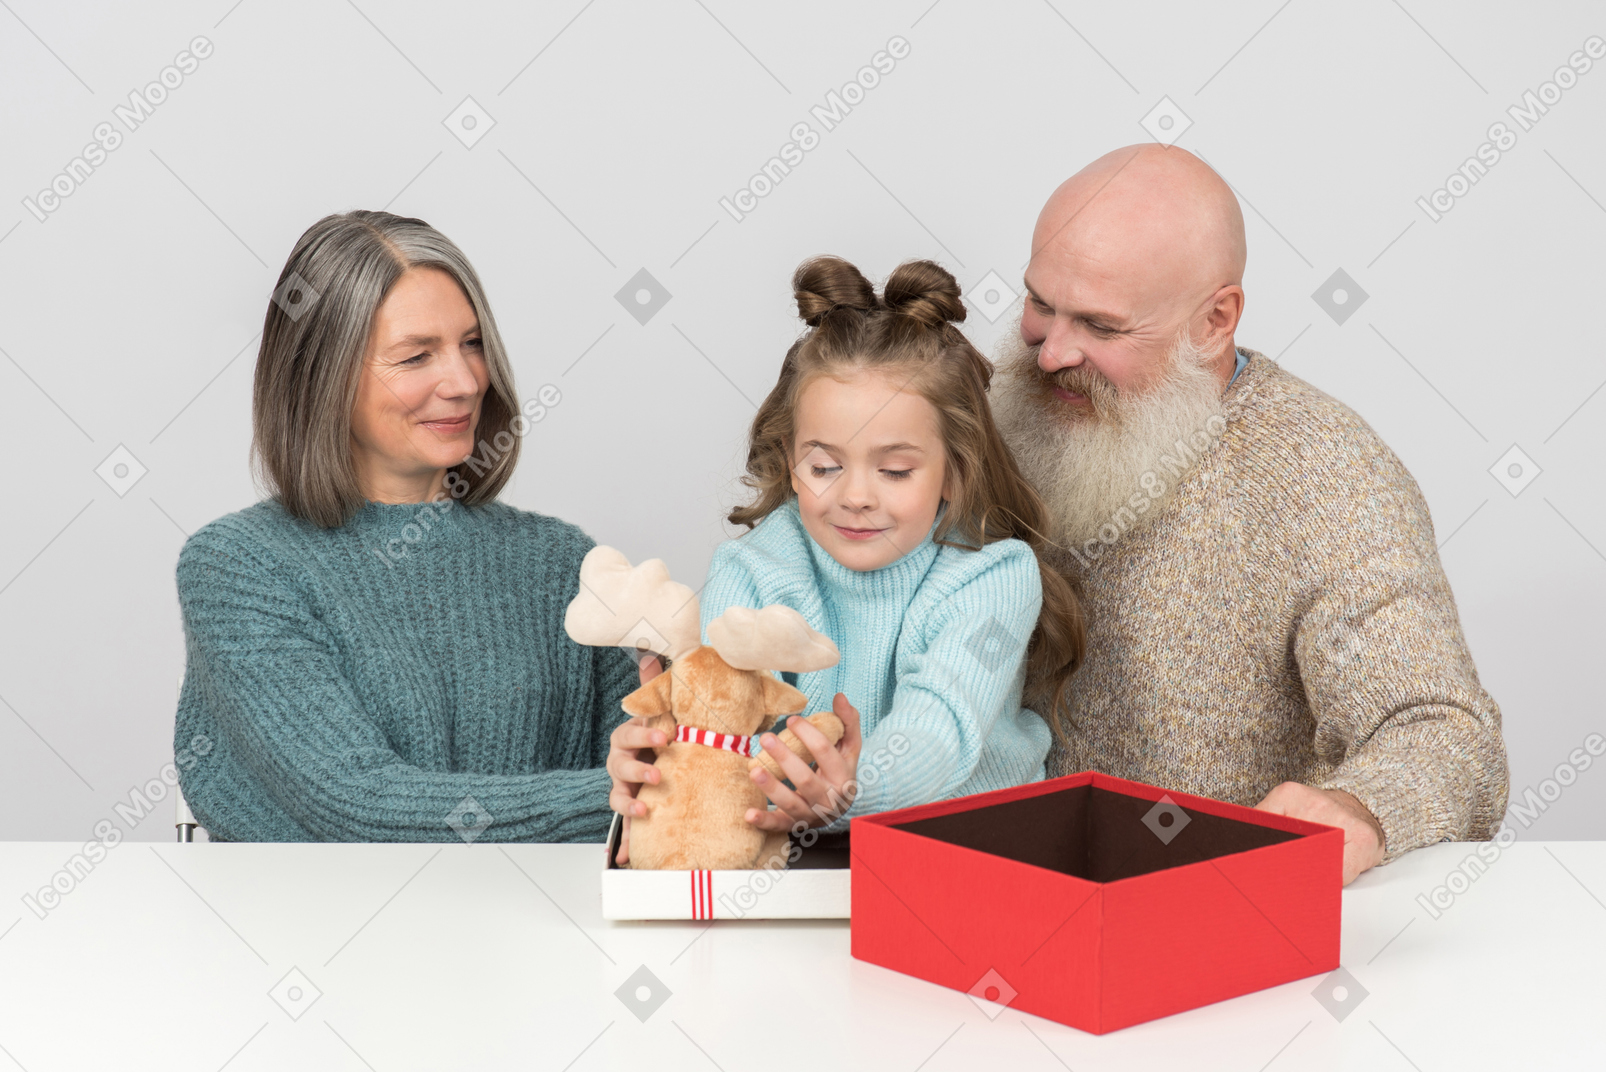 Grandparents looking as their granddaughter playing with toy